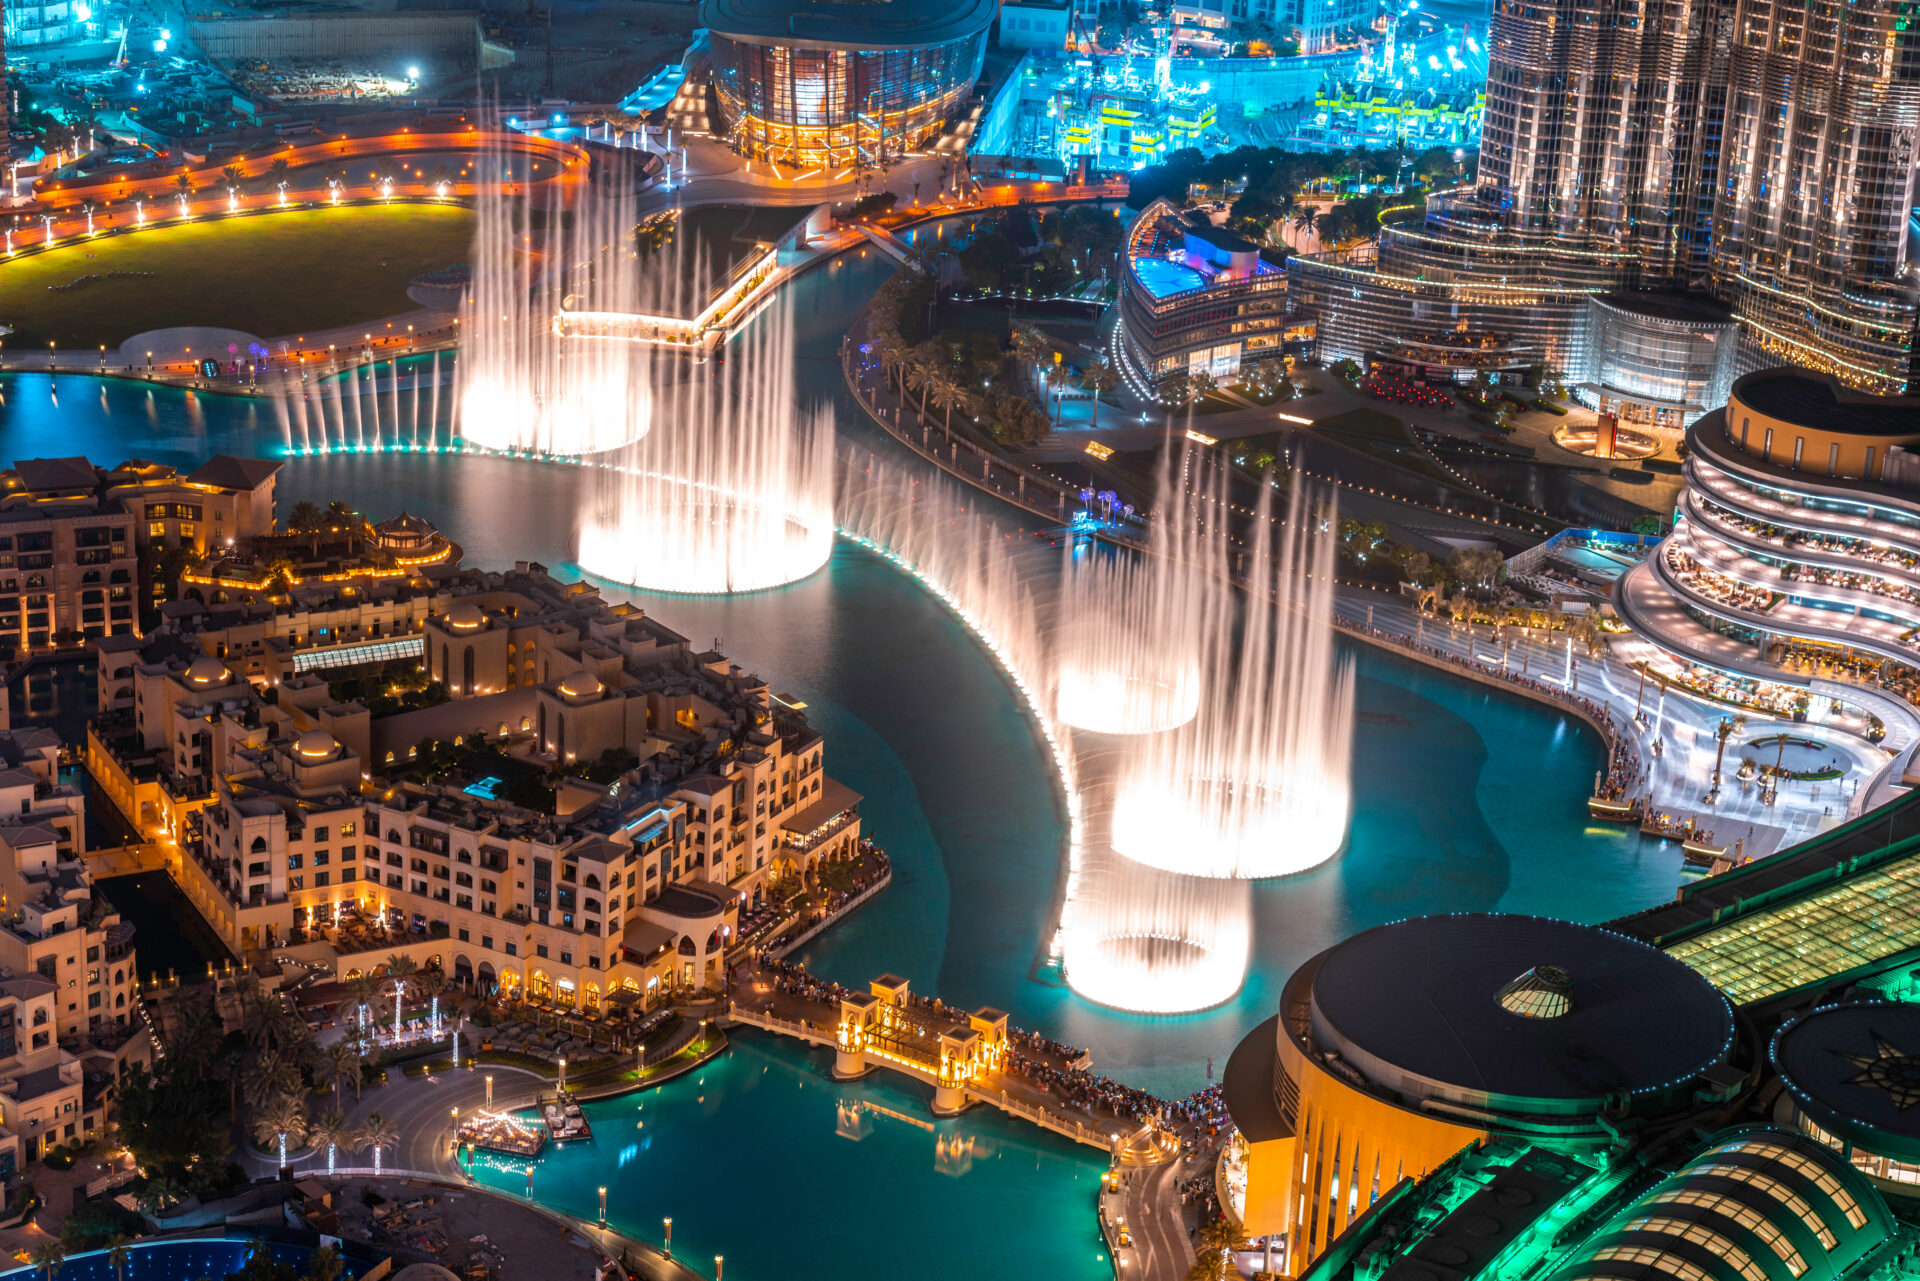 Dubai Fountain - Water show view from above